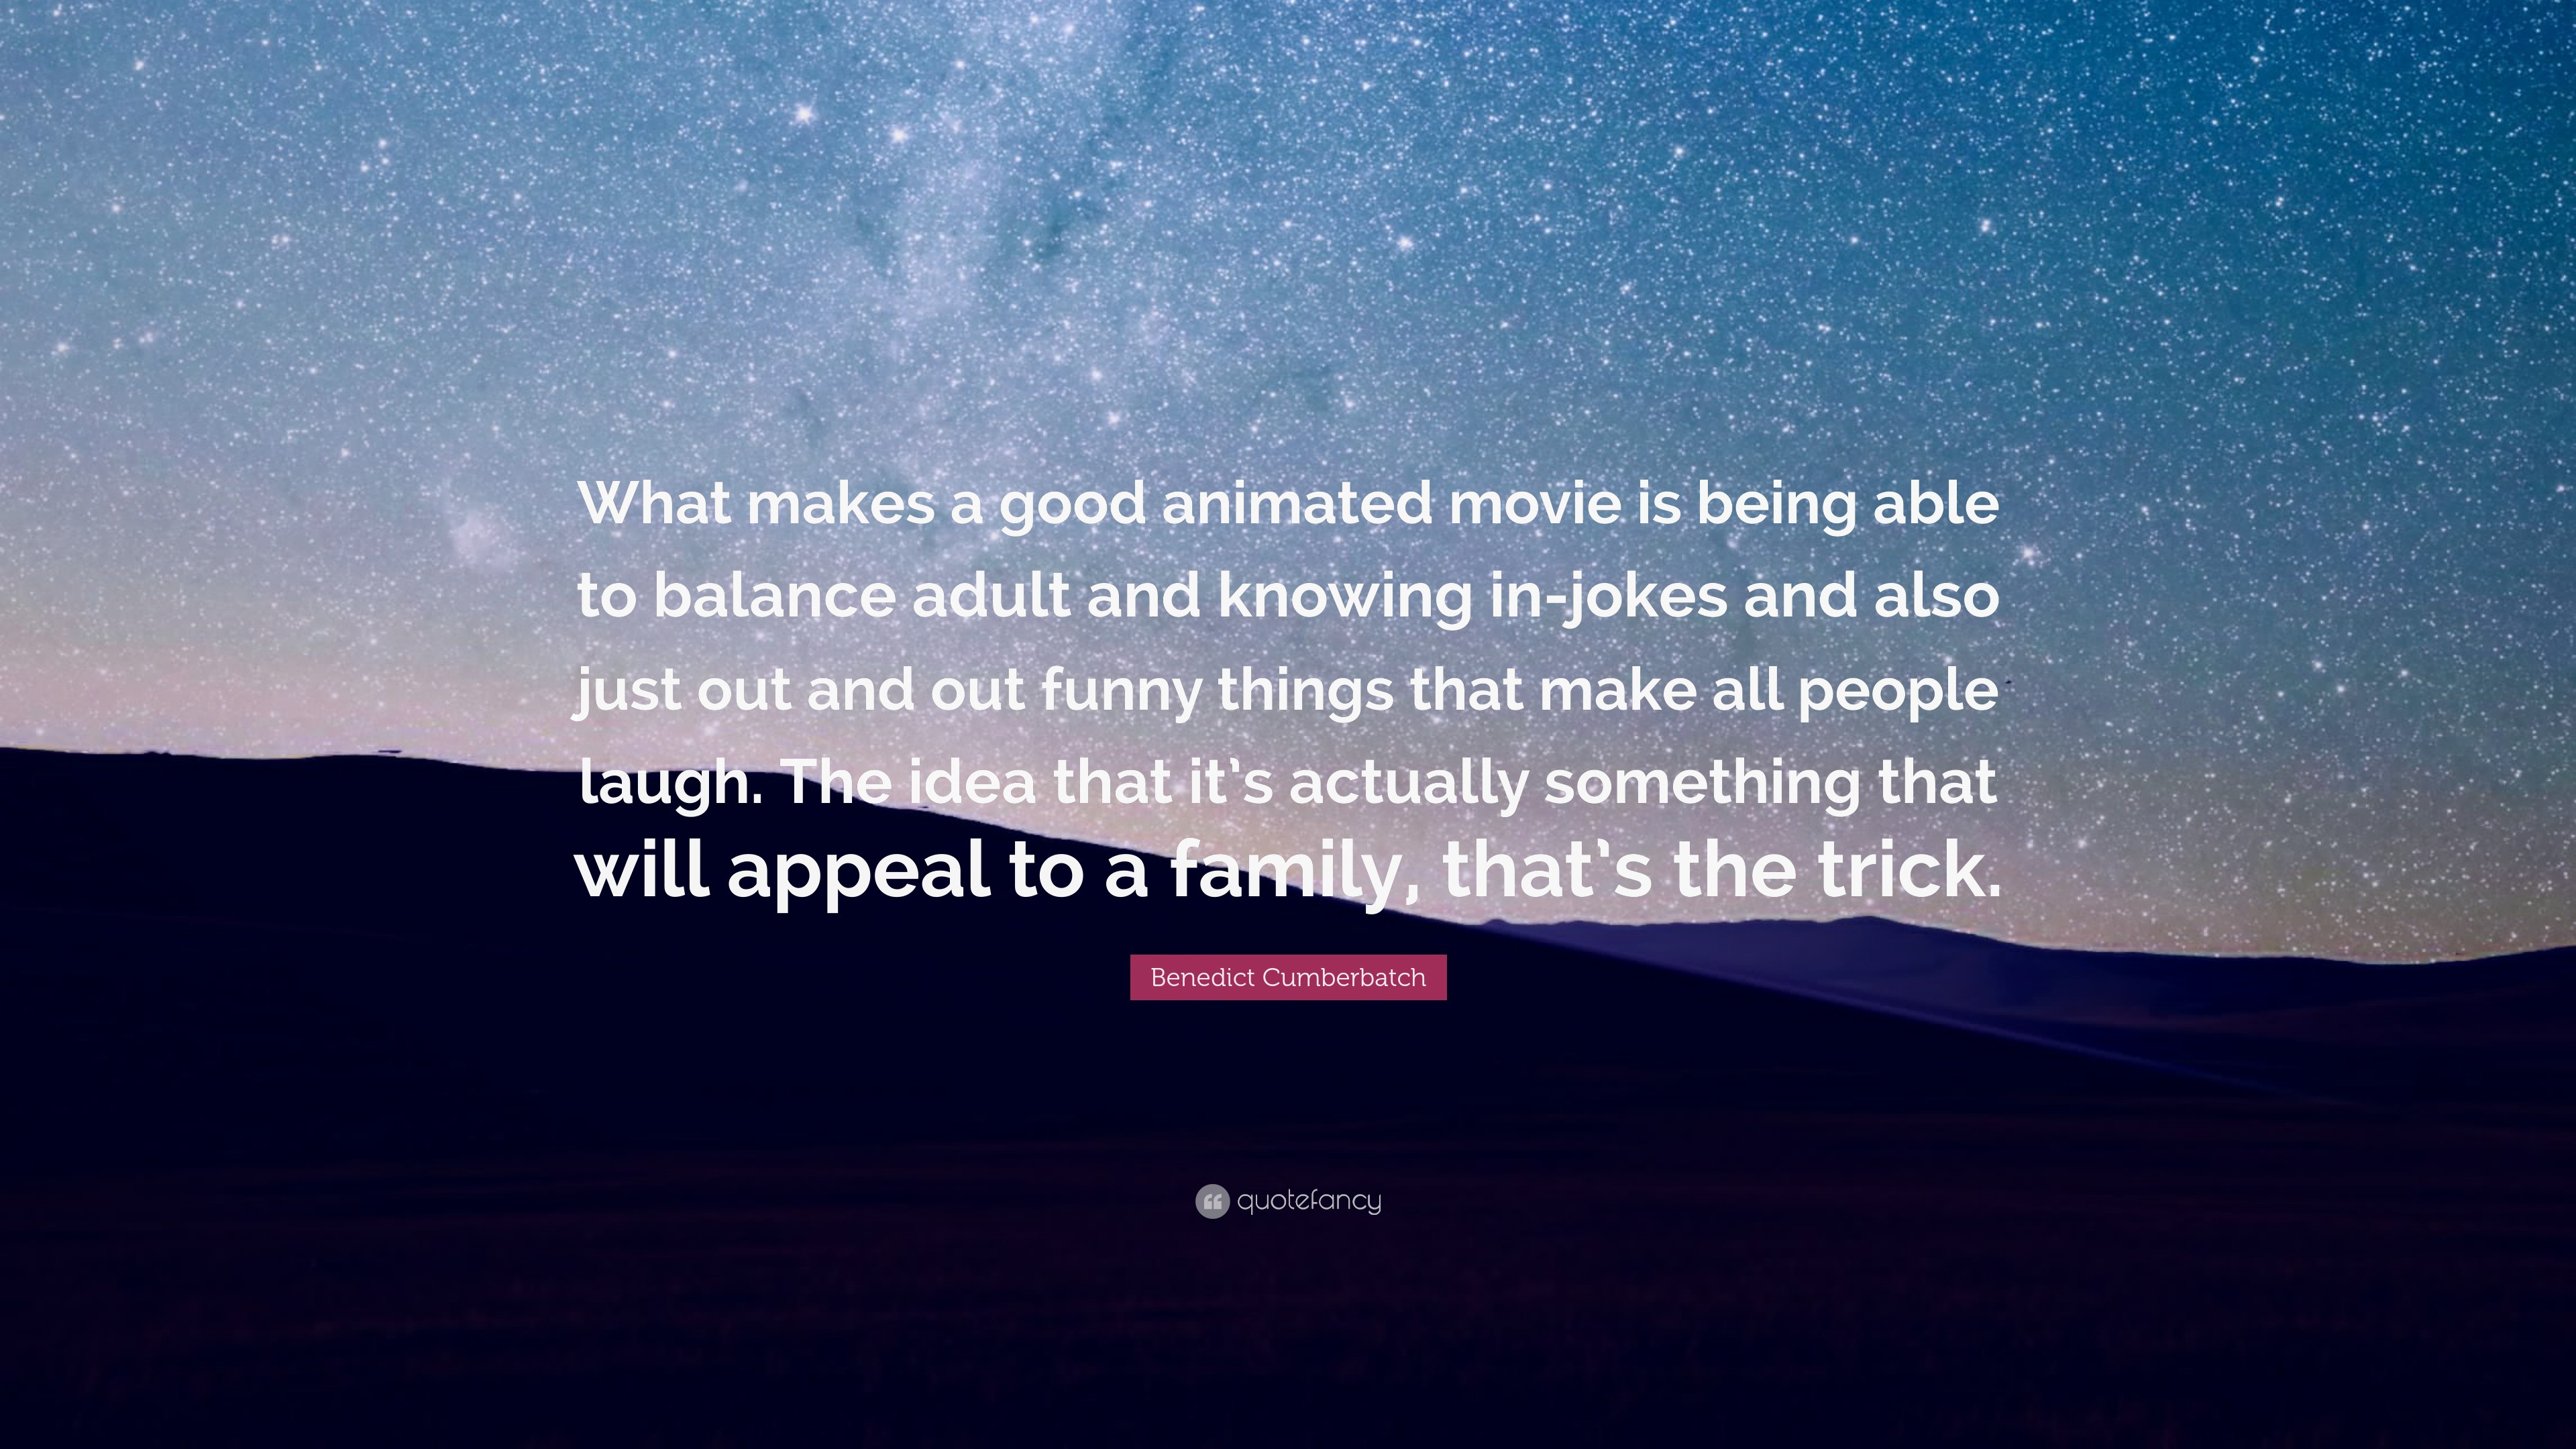 Benedict Cumberbatch Quote: “What makes a good animated movie is being able  to balance adult and knowing in-jokes and also just out and out funny  thi...”